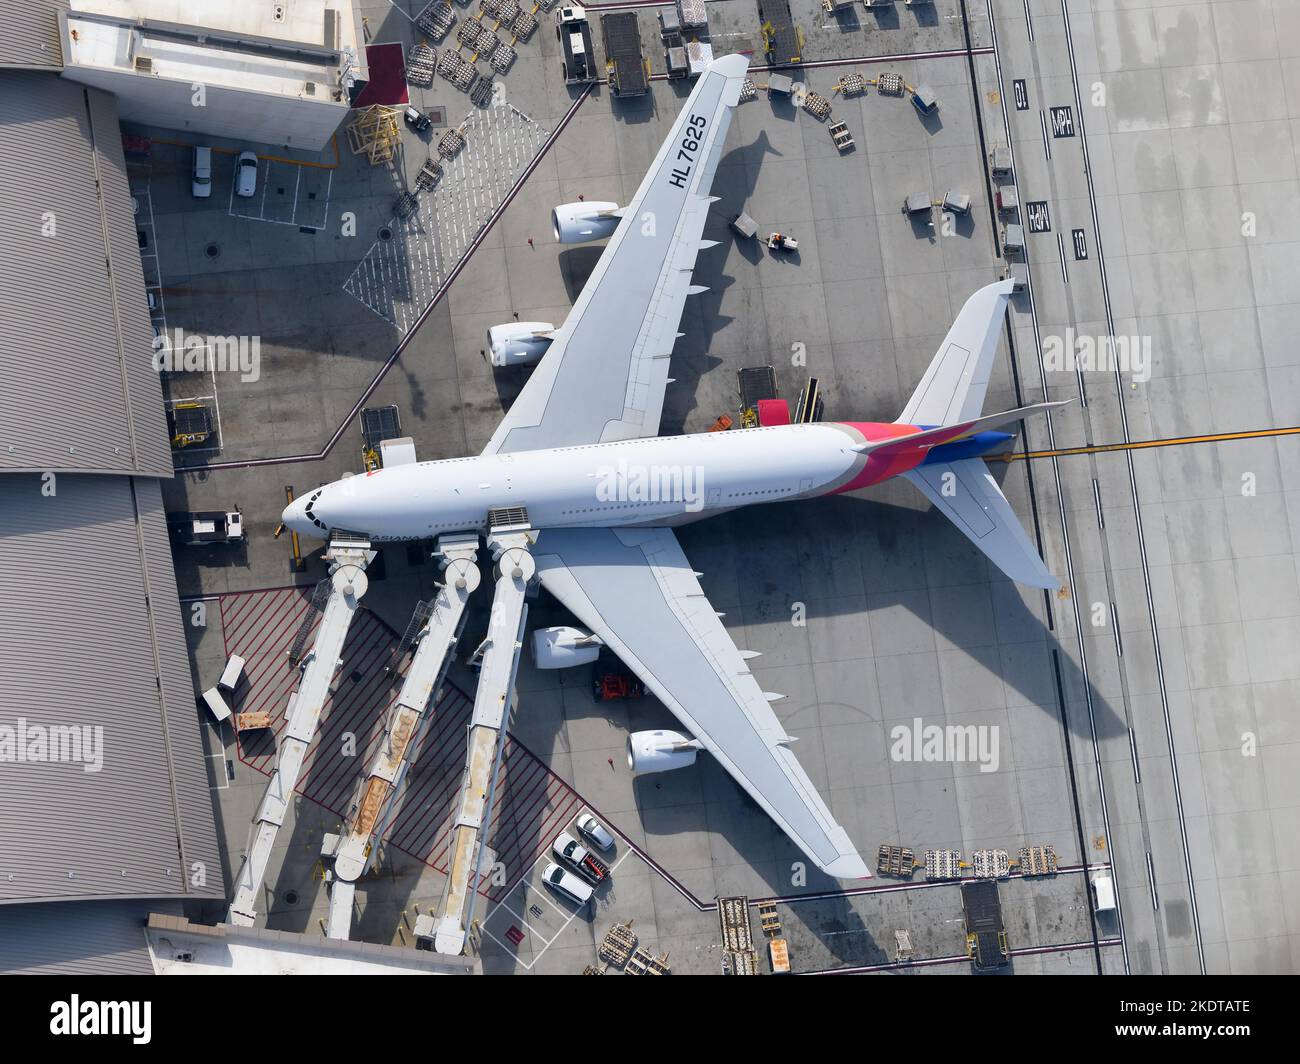 Asiana Airlines Airbus A380 aircraft parked seen from above. Airplane A380-800 of Asiana Airlines registered as HL7625 aerial view. Stock Photo